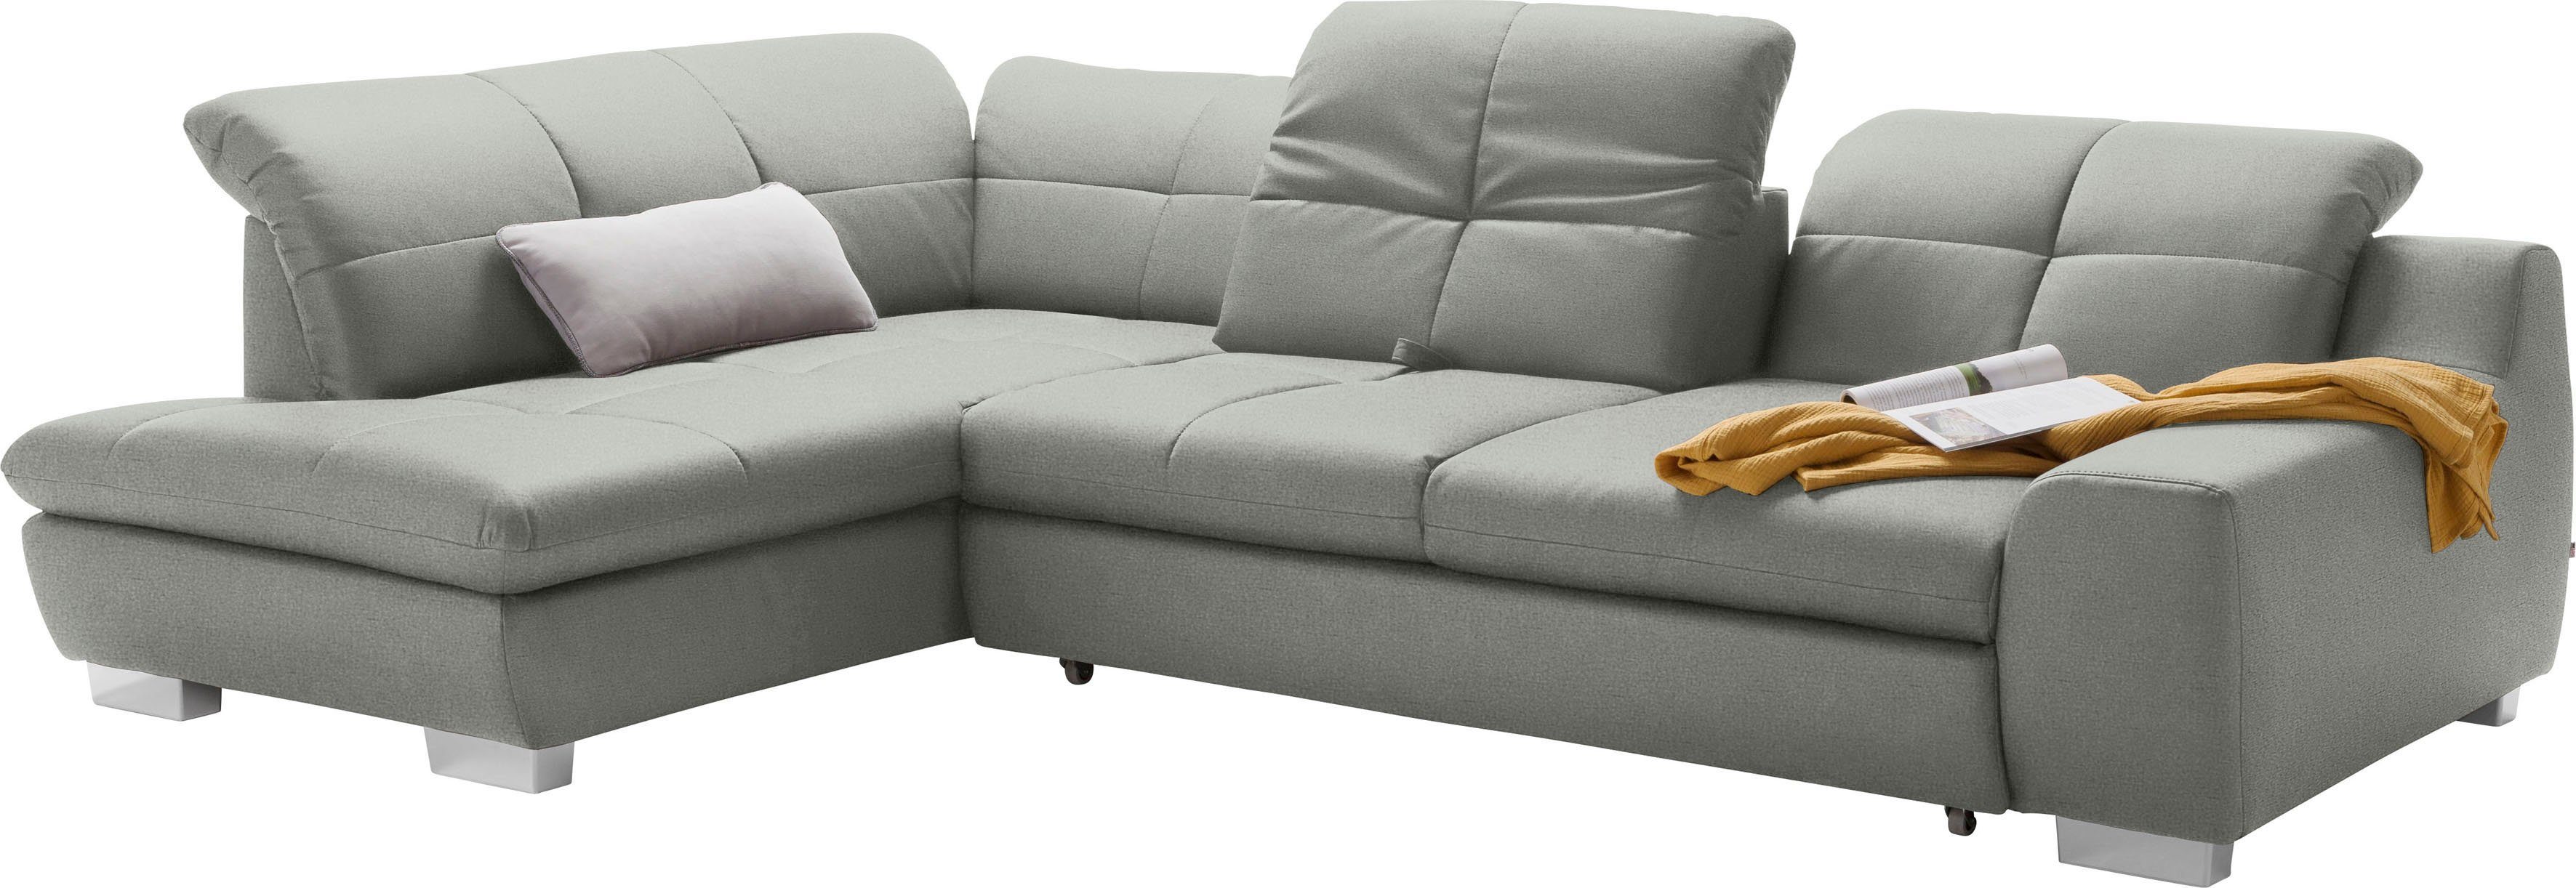 SO Musterring Bettfunktion mit set Ecksofa one by wahlweise 1200,